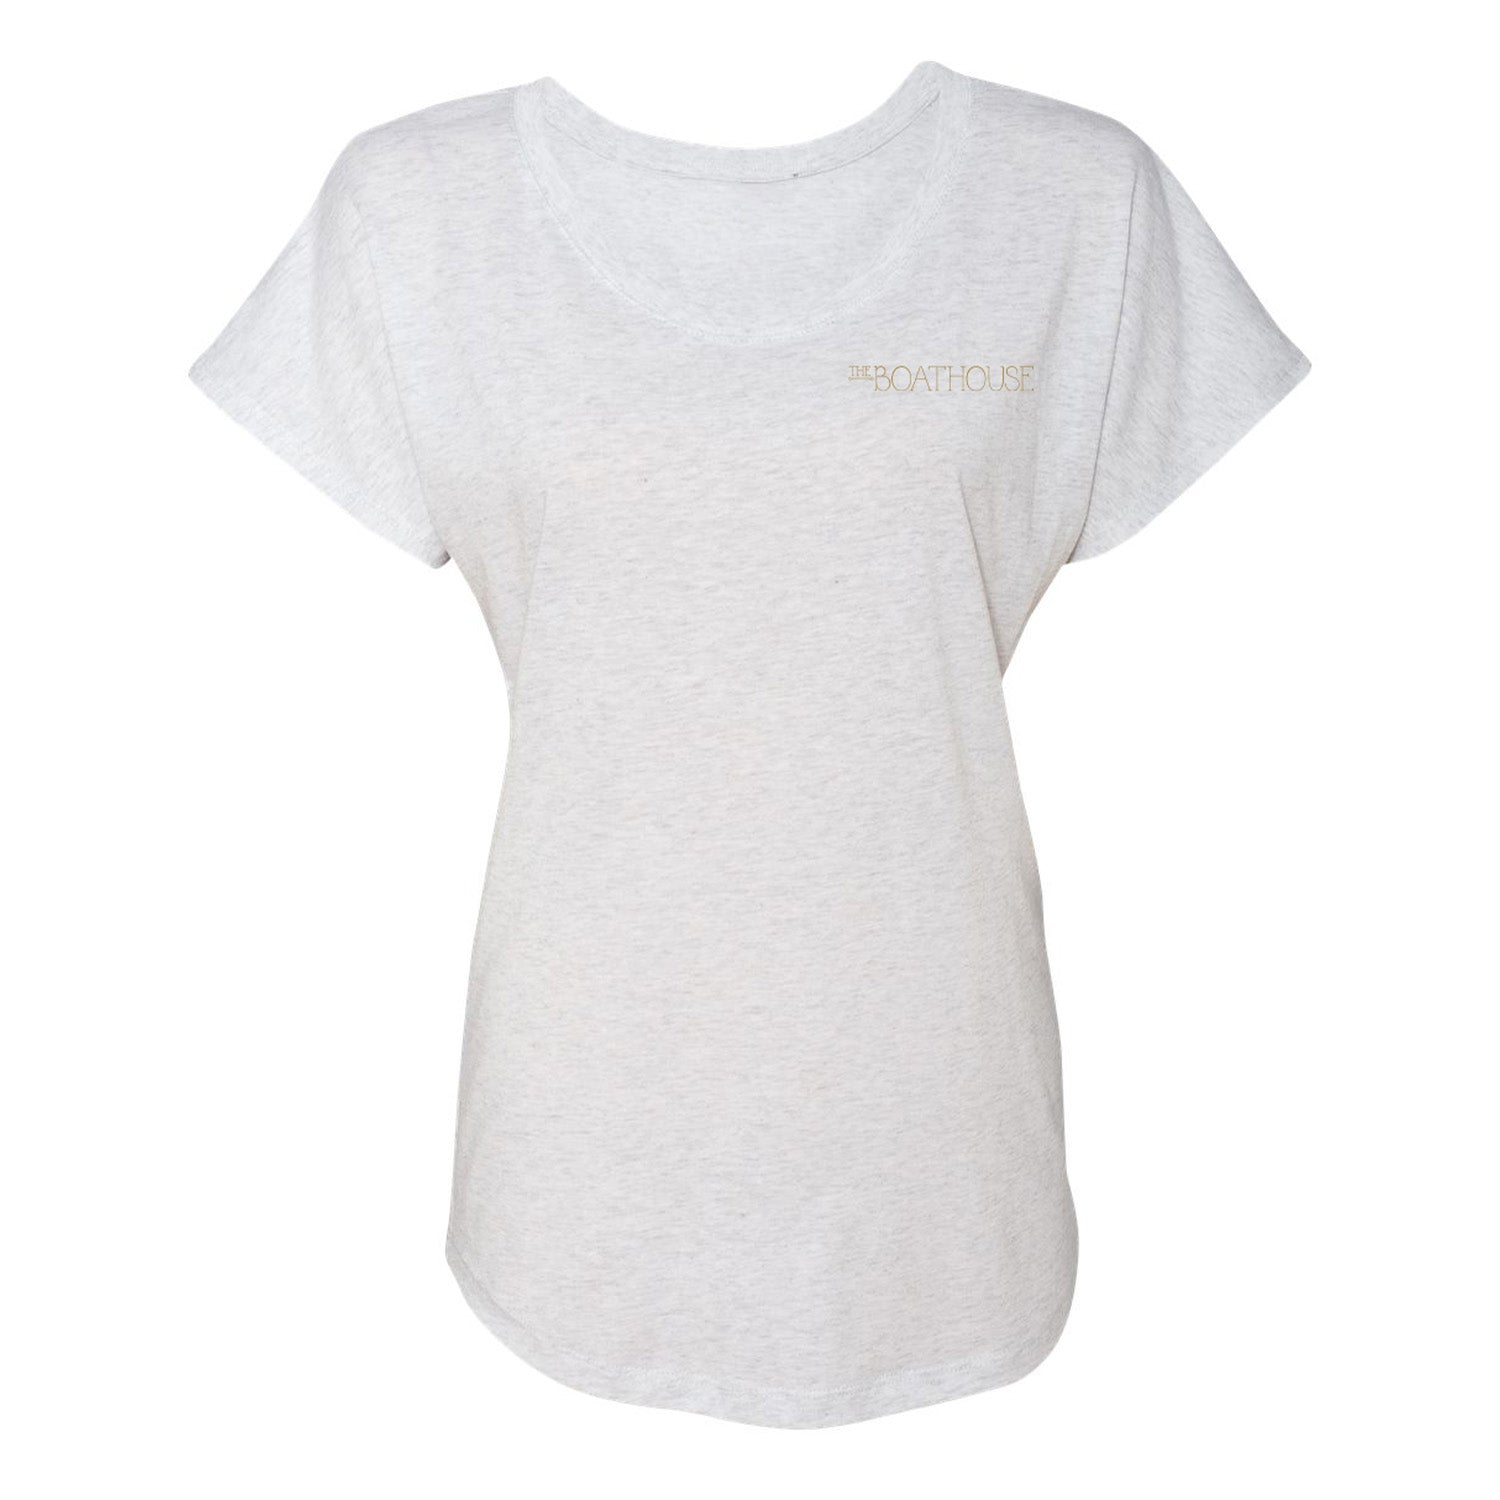 Central Park Boathouse Ladies White Scoop Neck T-Shirt - Front View